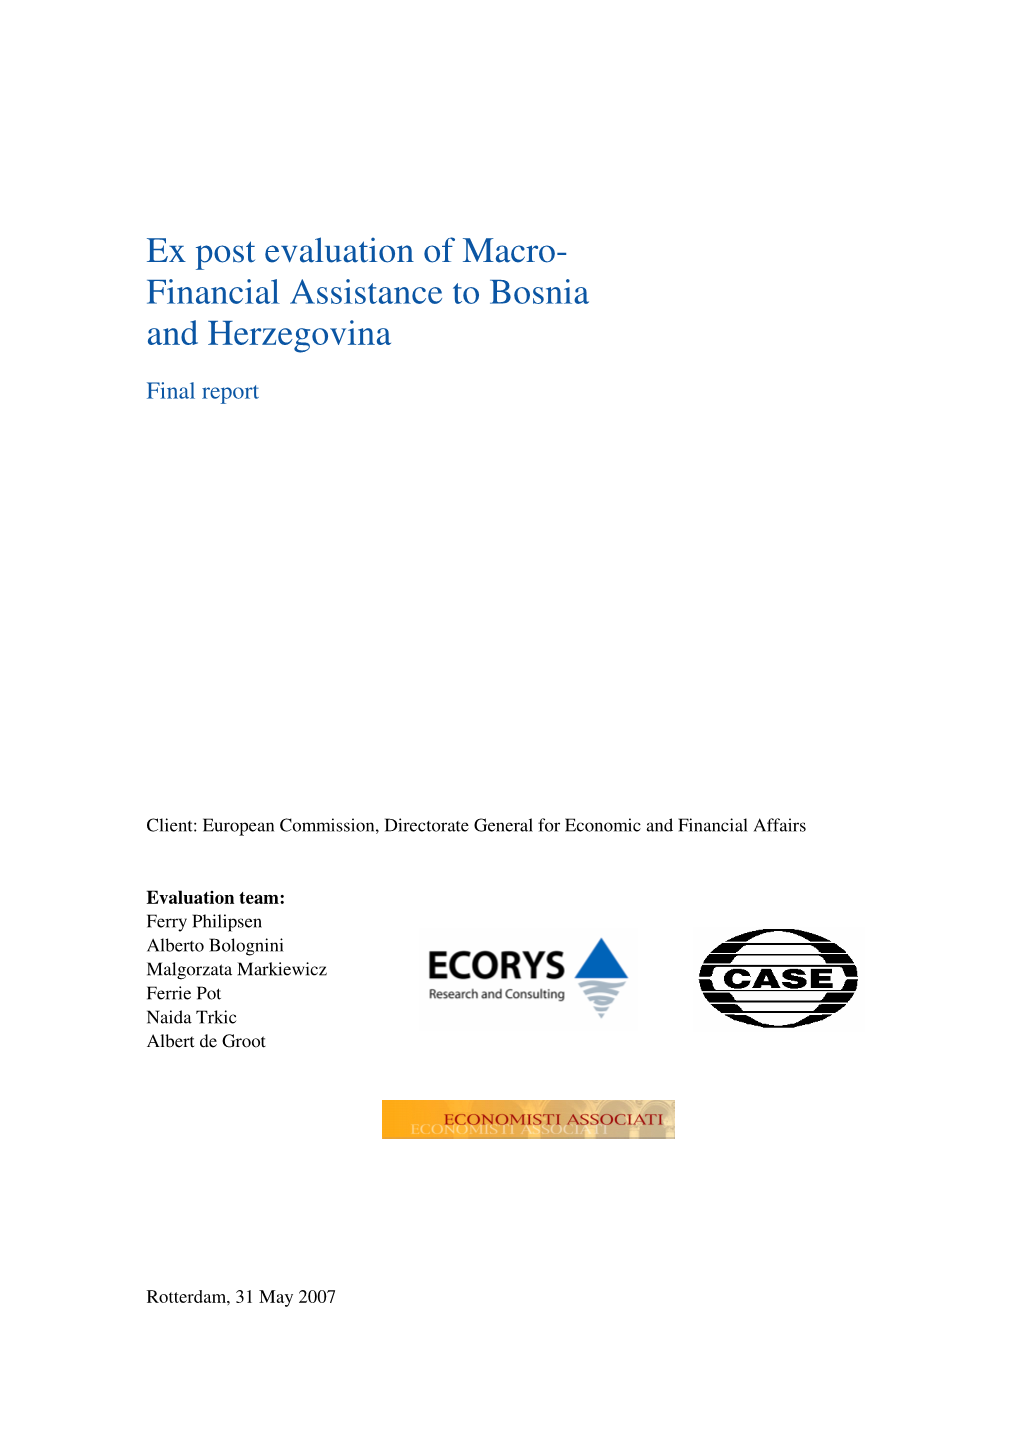 Ex Post Evaluation of Macro- Financial Assistance to Bosnia and Herzegovina